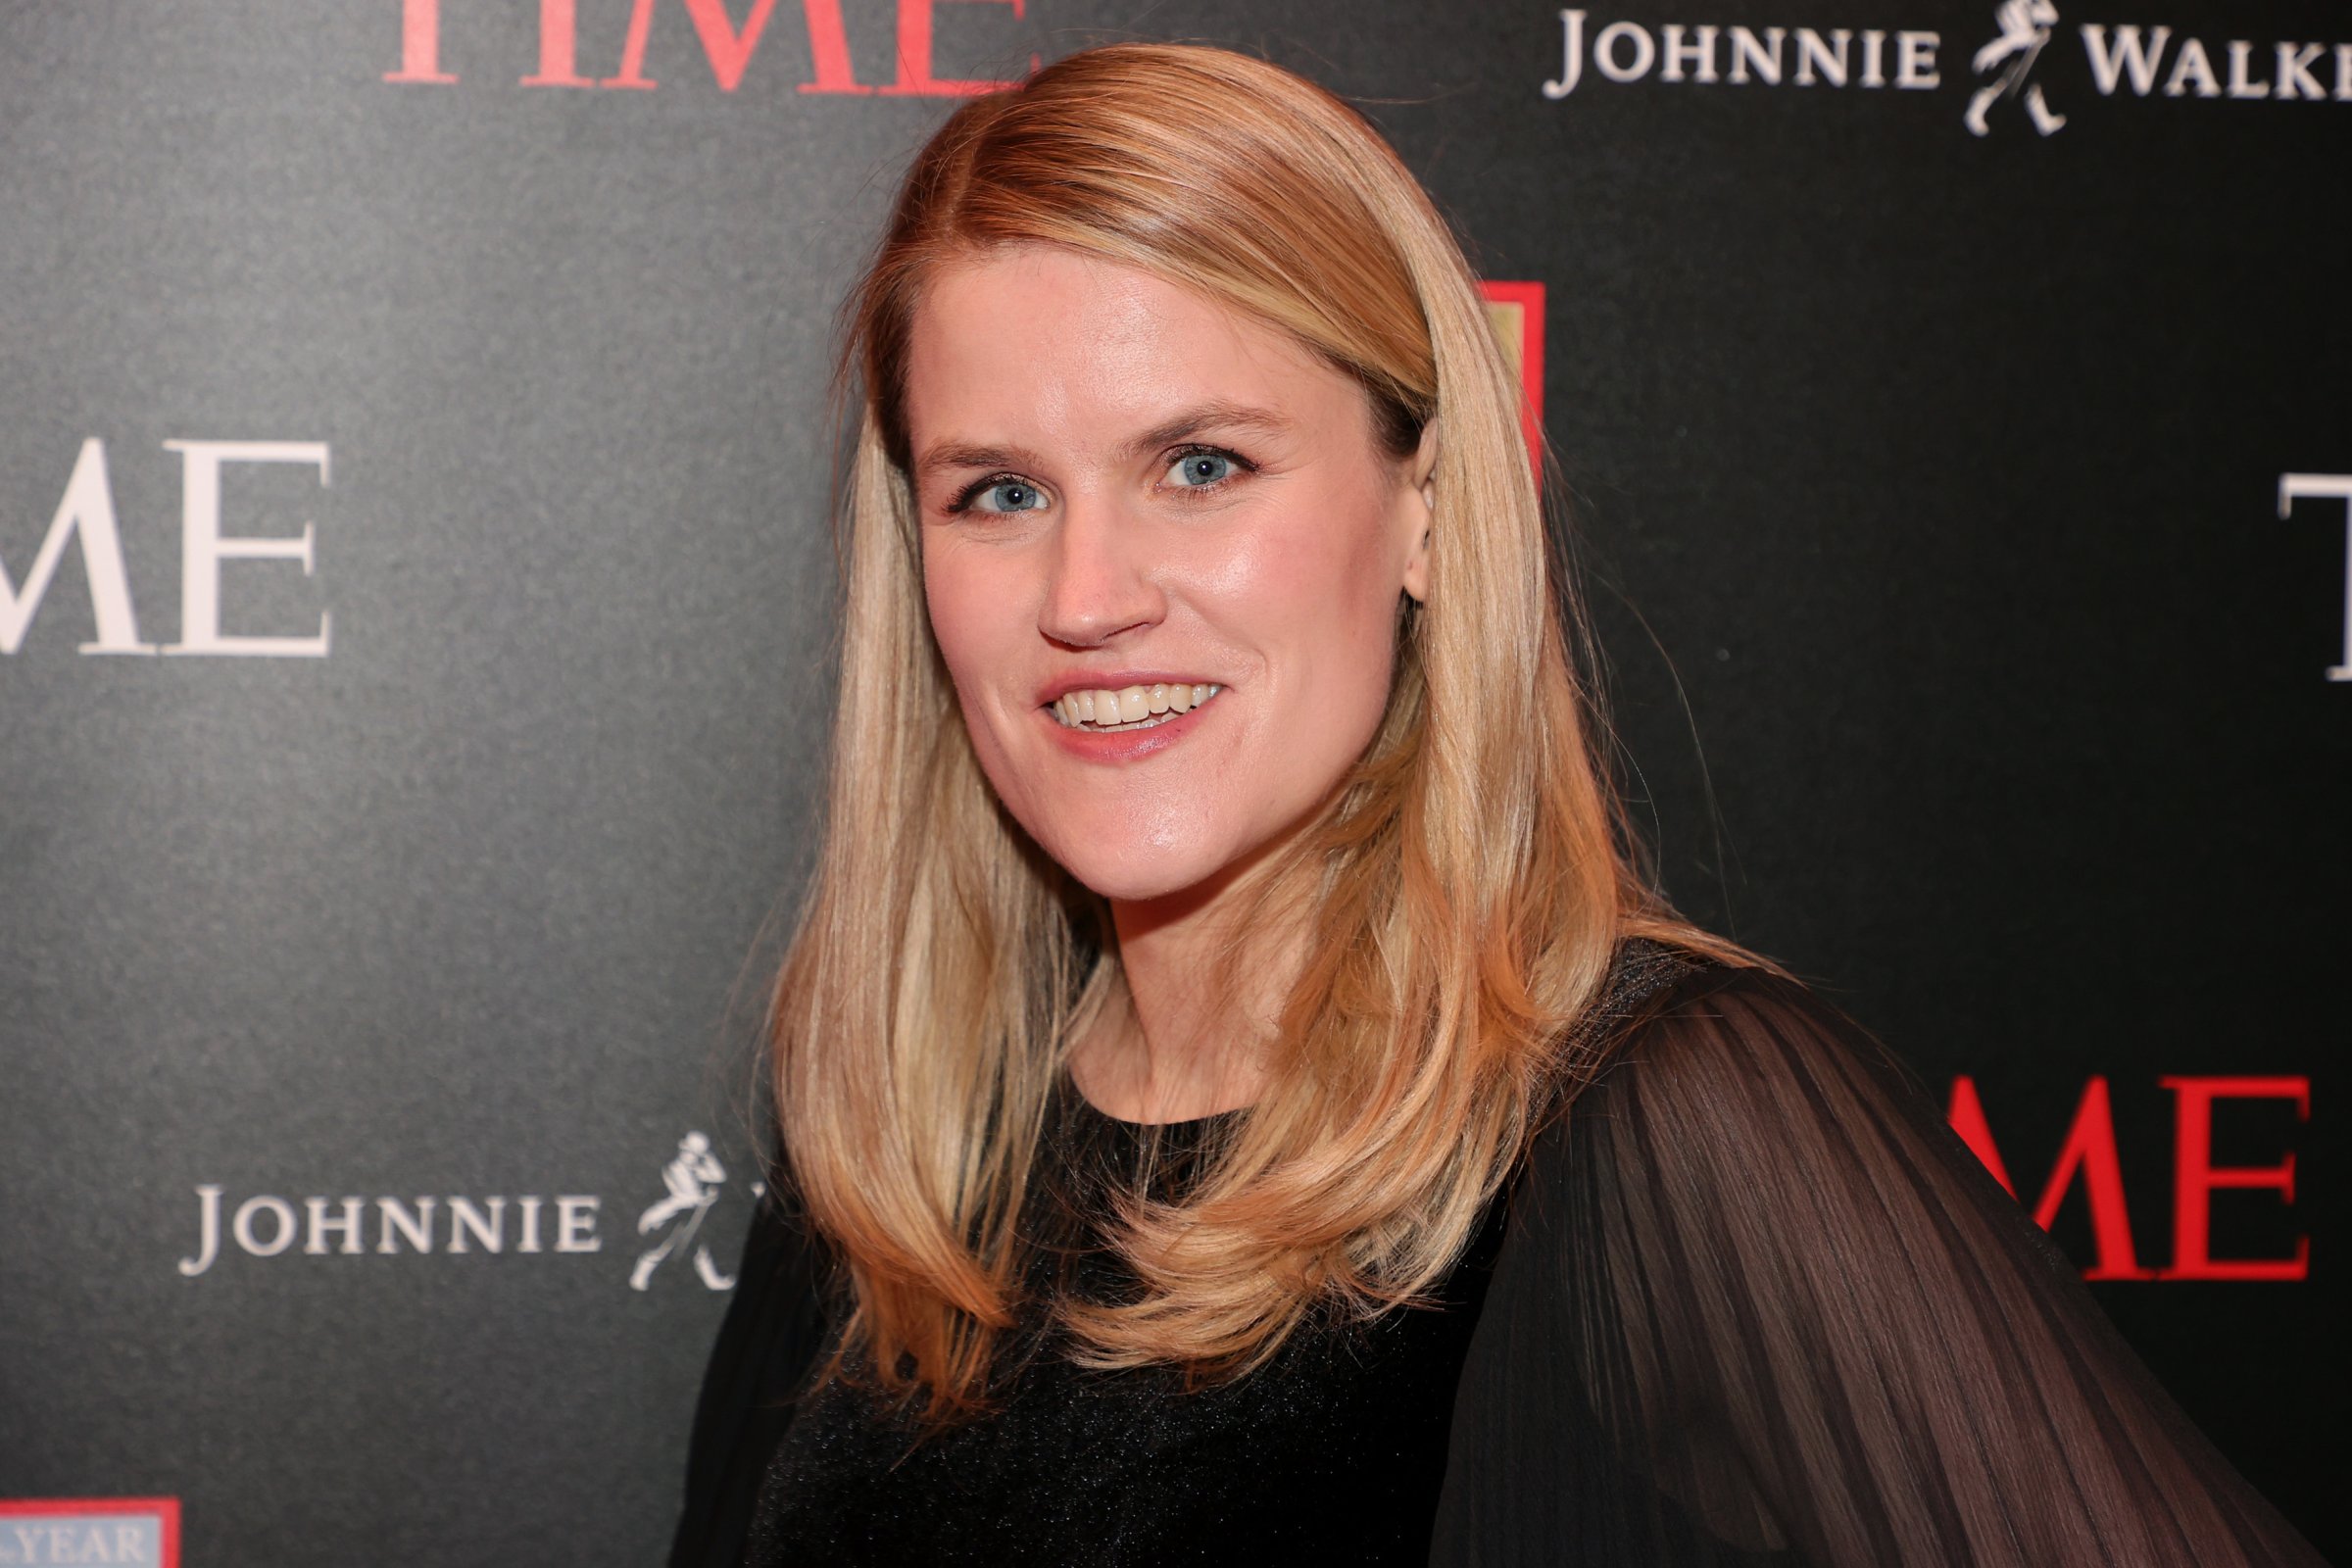 Frances Haugen attends TIME Person of the Year in New York, N.Y., on December 13, 2021.